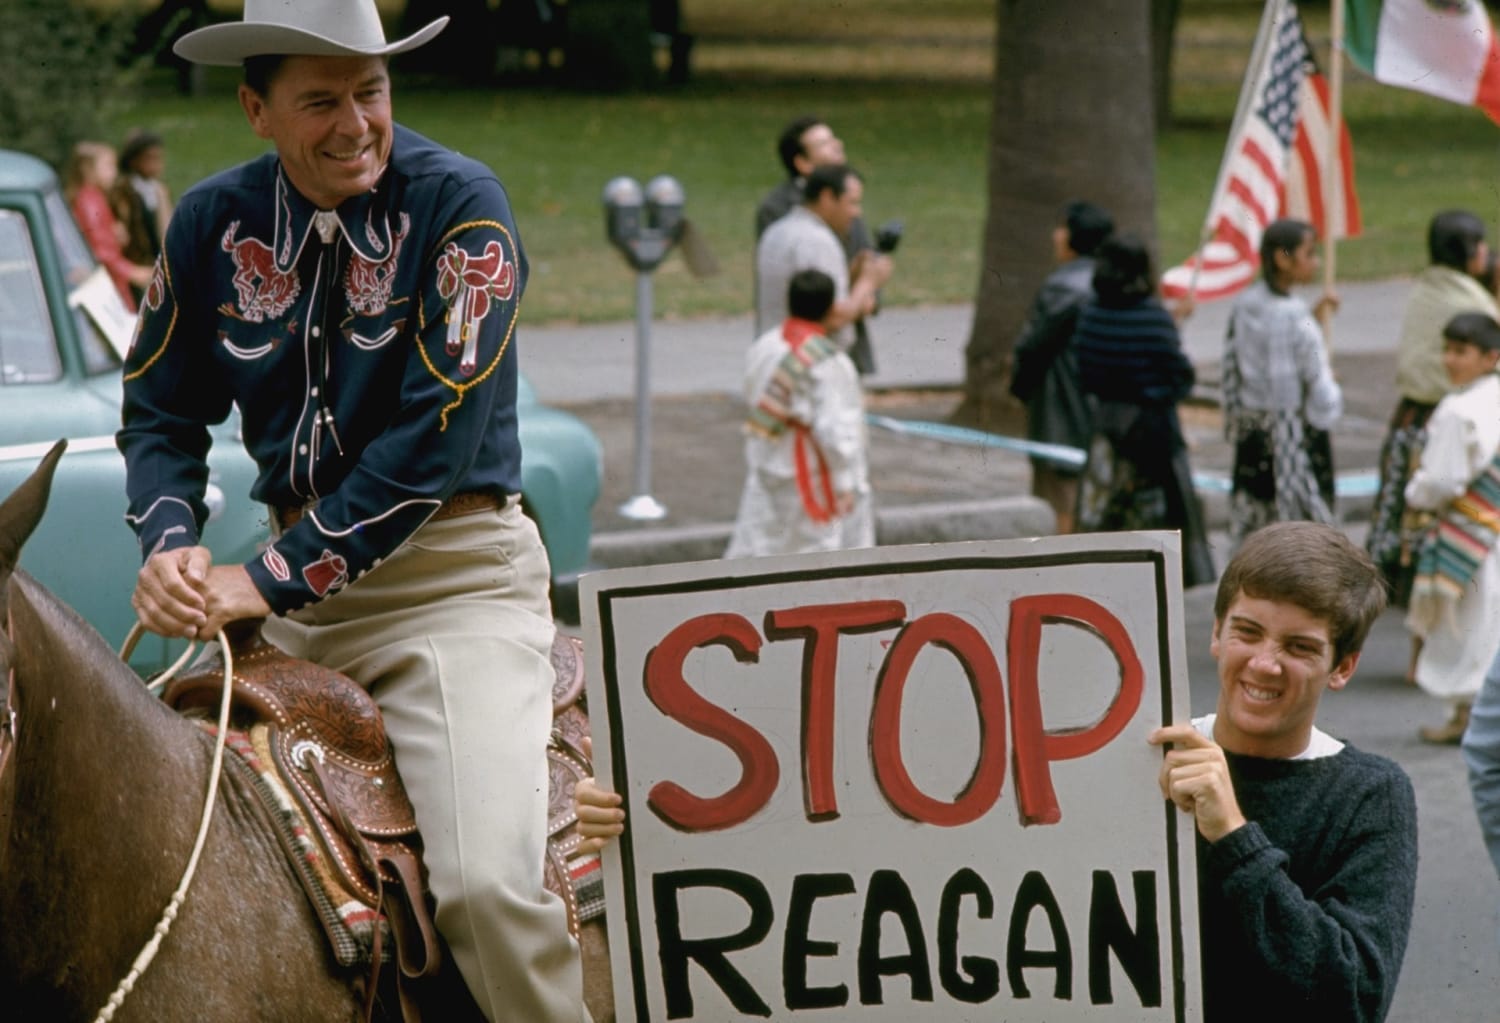 Ronald Reagan campaigning as a gubernatorial candidate, flanked by a young protester, 1966 | Photo: Bill Ray